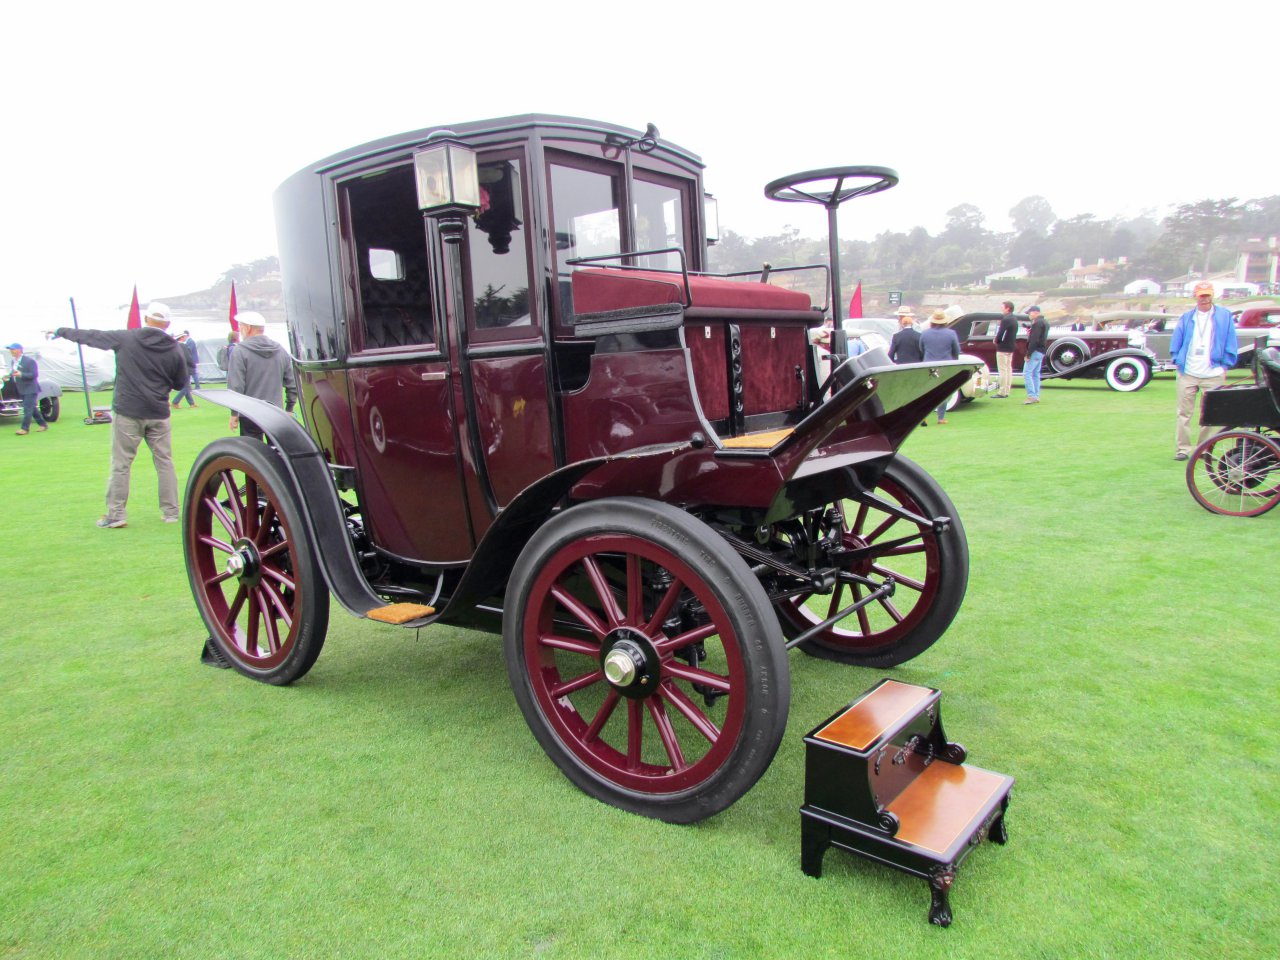 electric vehicles, Pebble Beach takes a look back at early electric vehicles, ClassicCars.com Journal